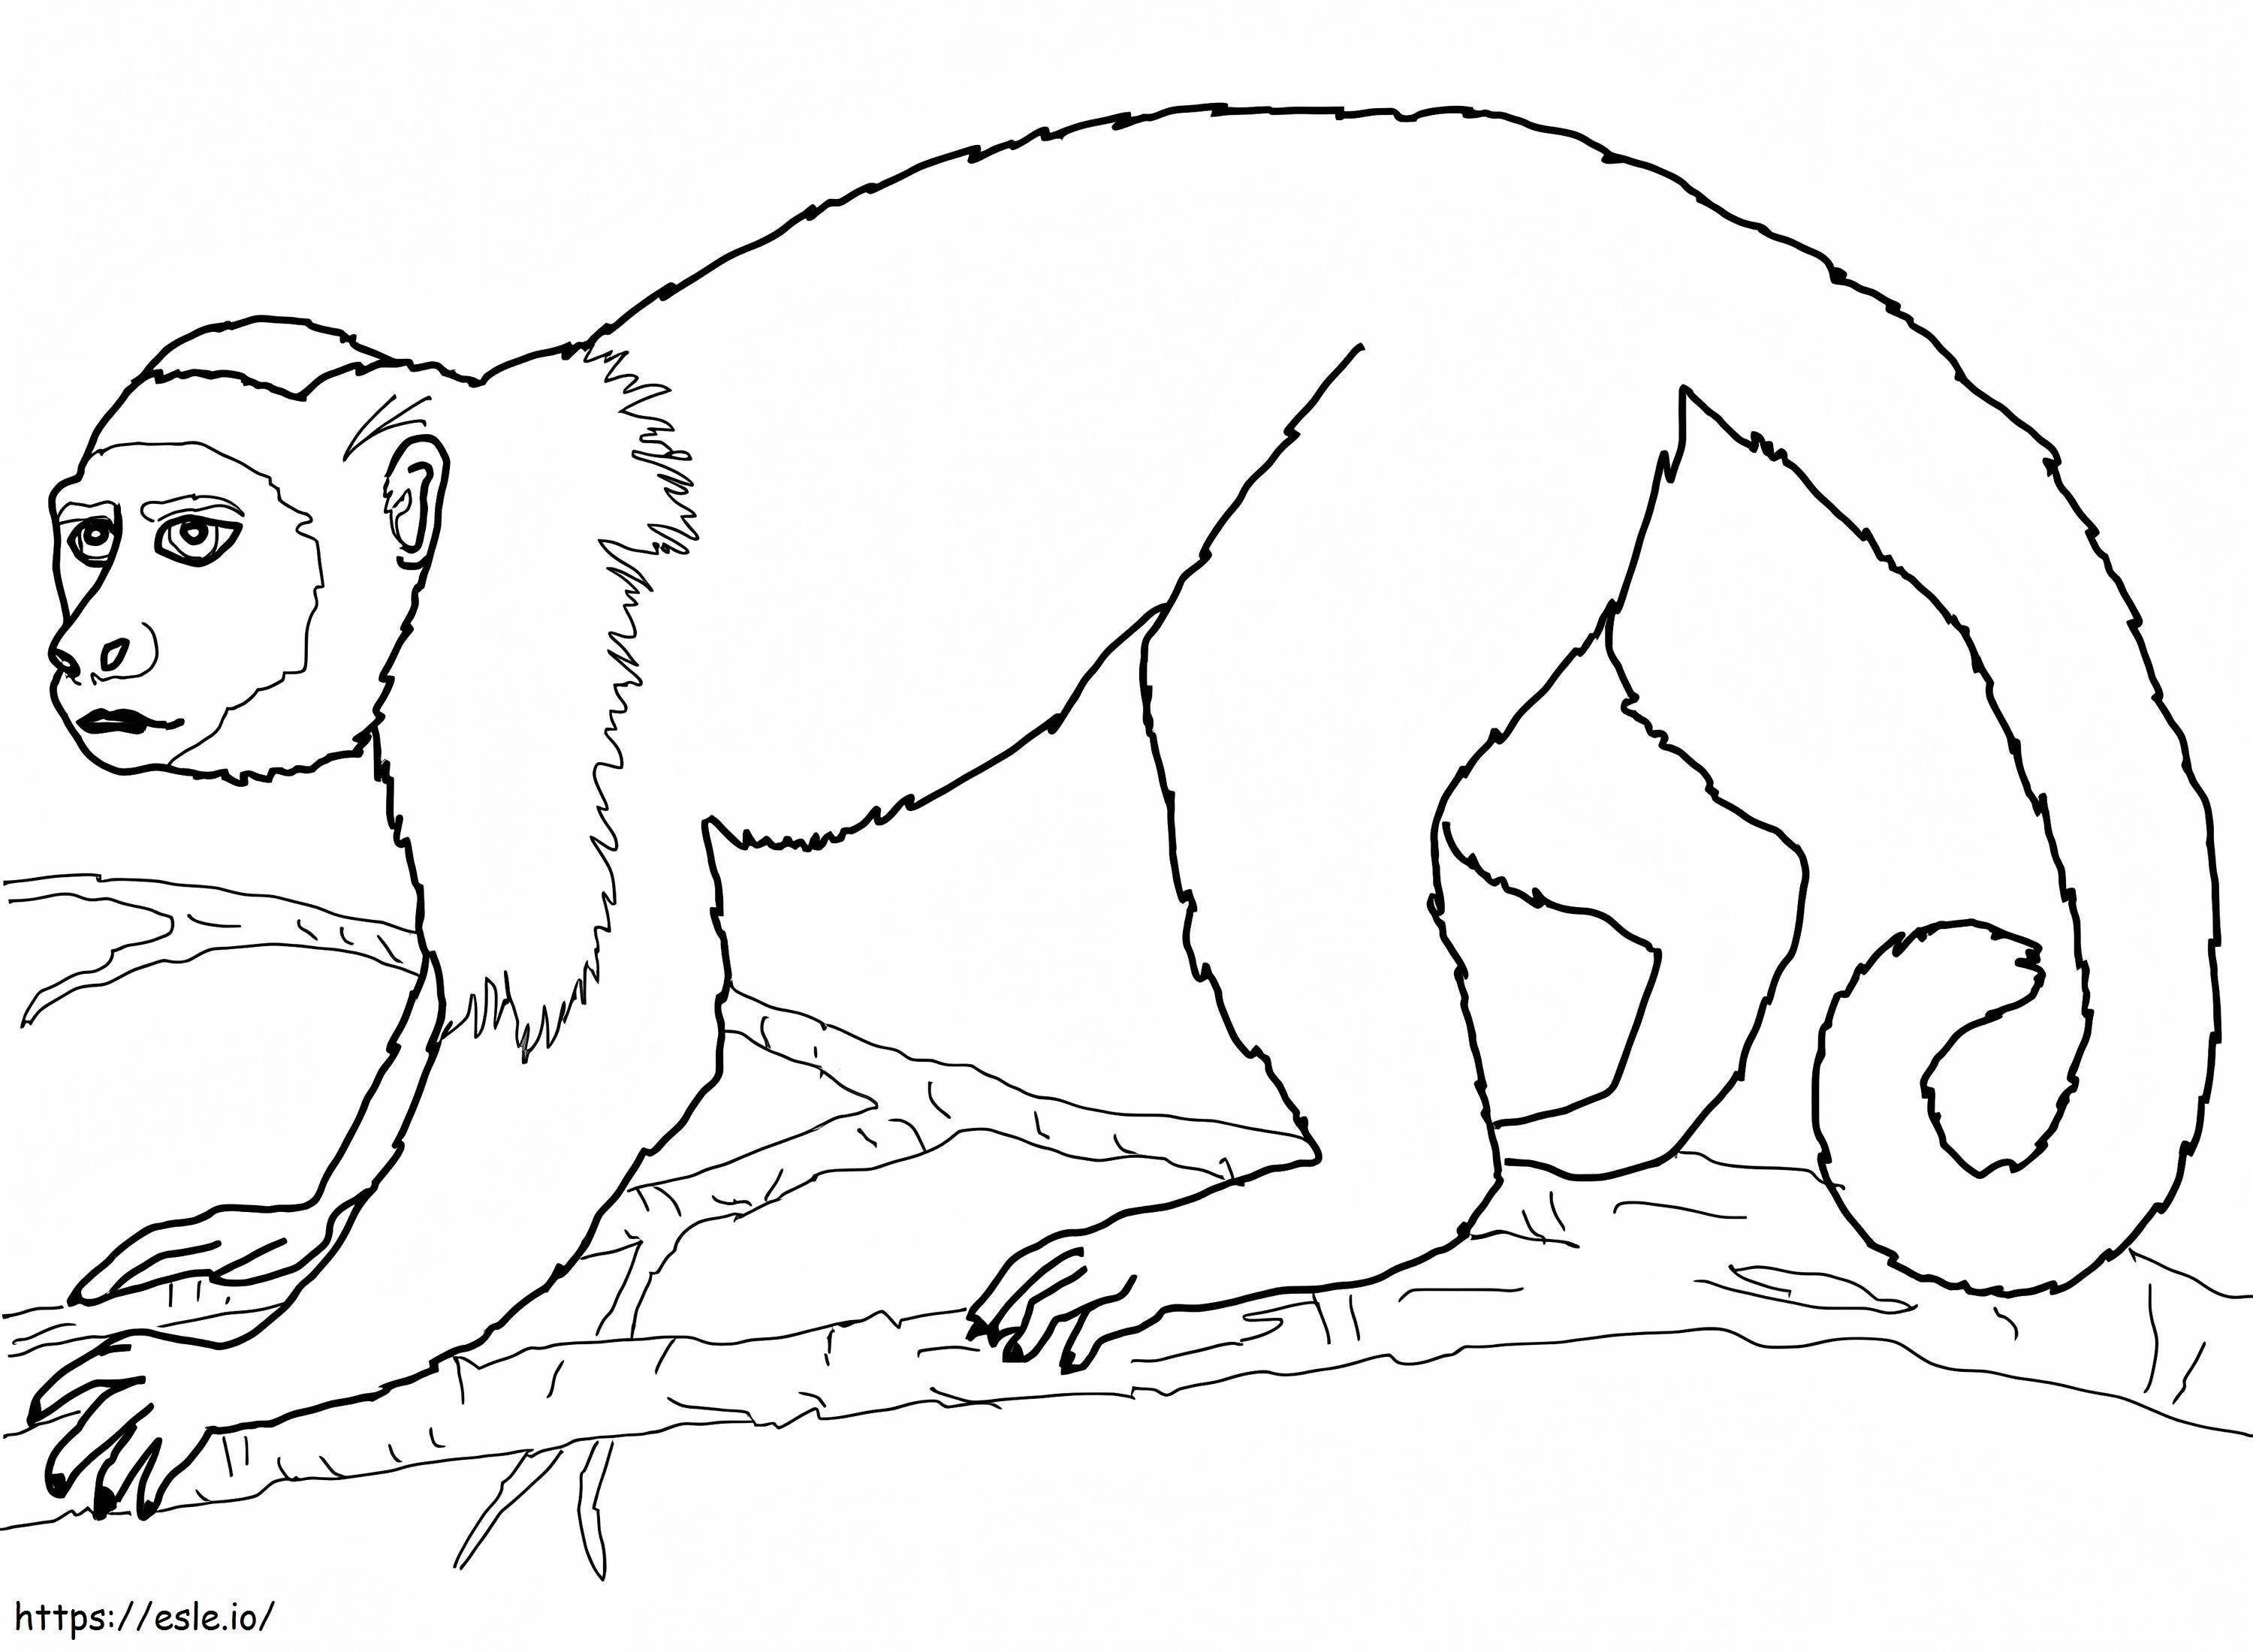 Capuchin Monkey coloring page